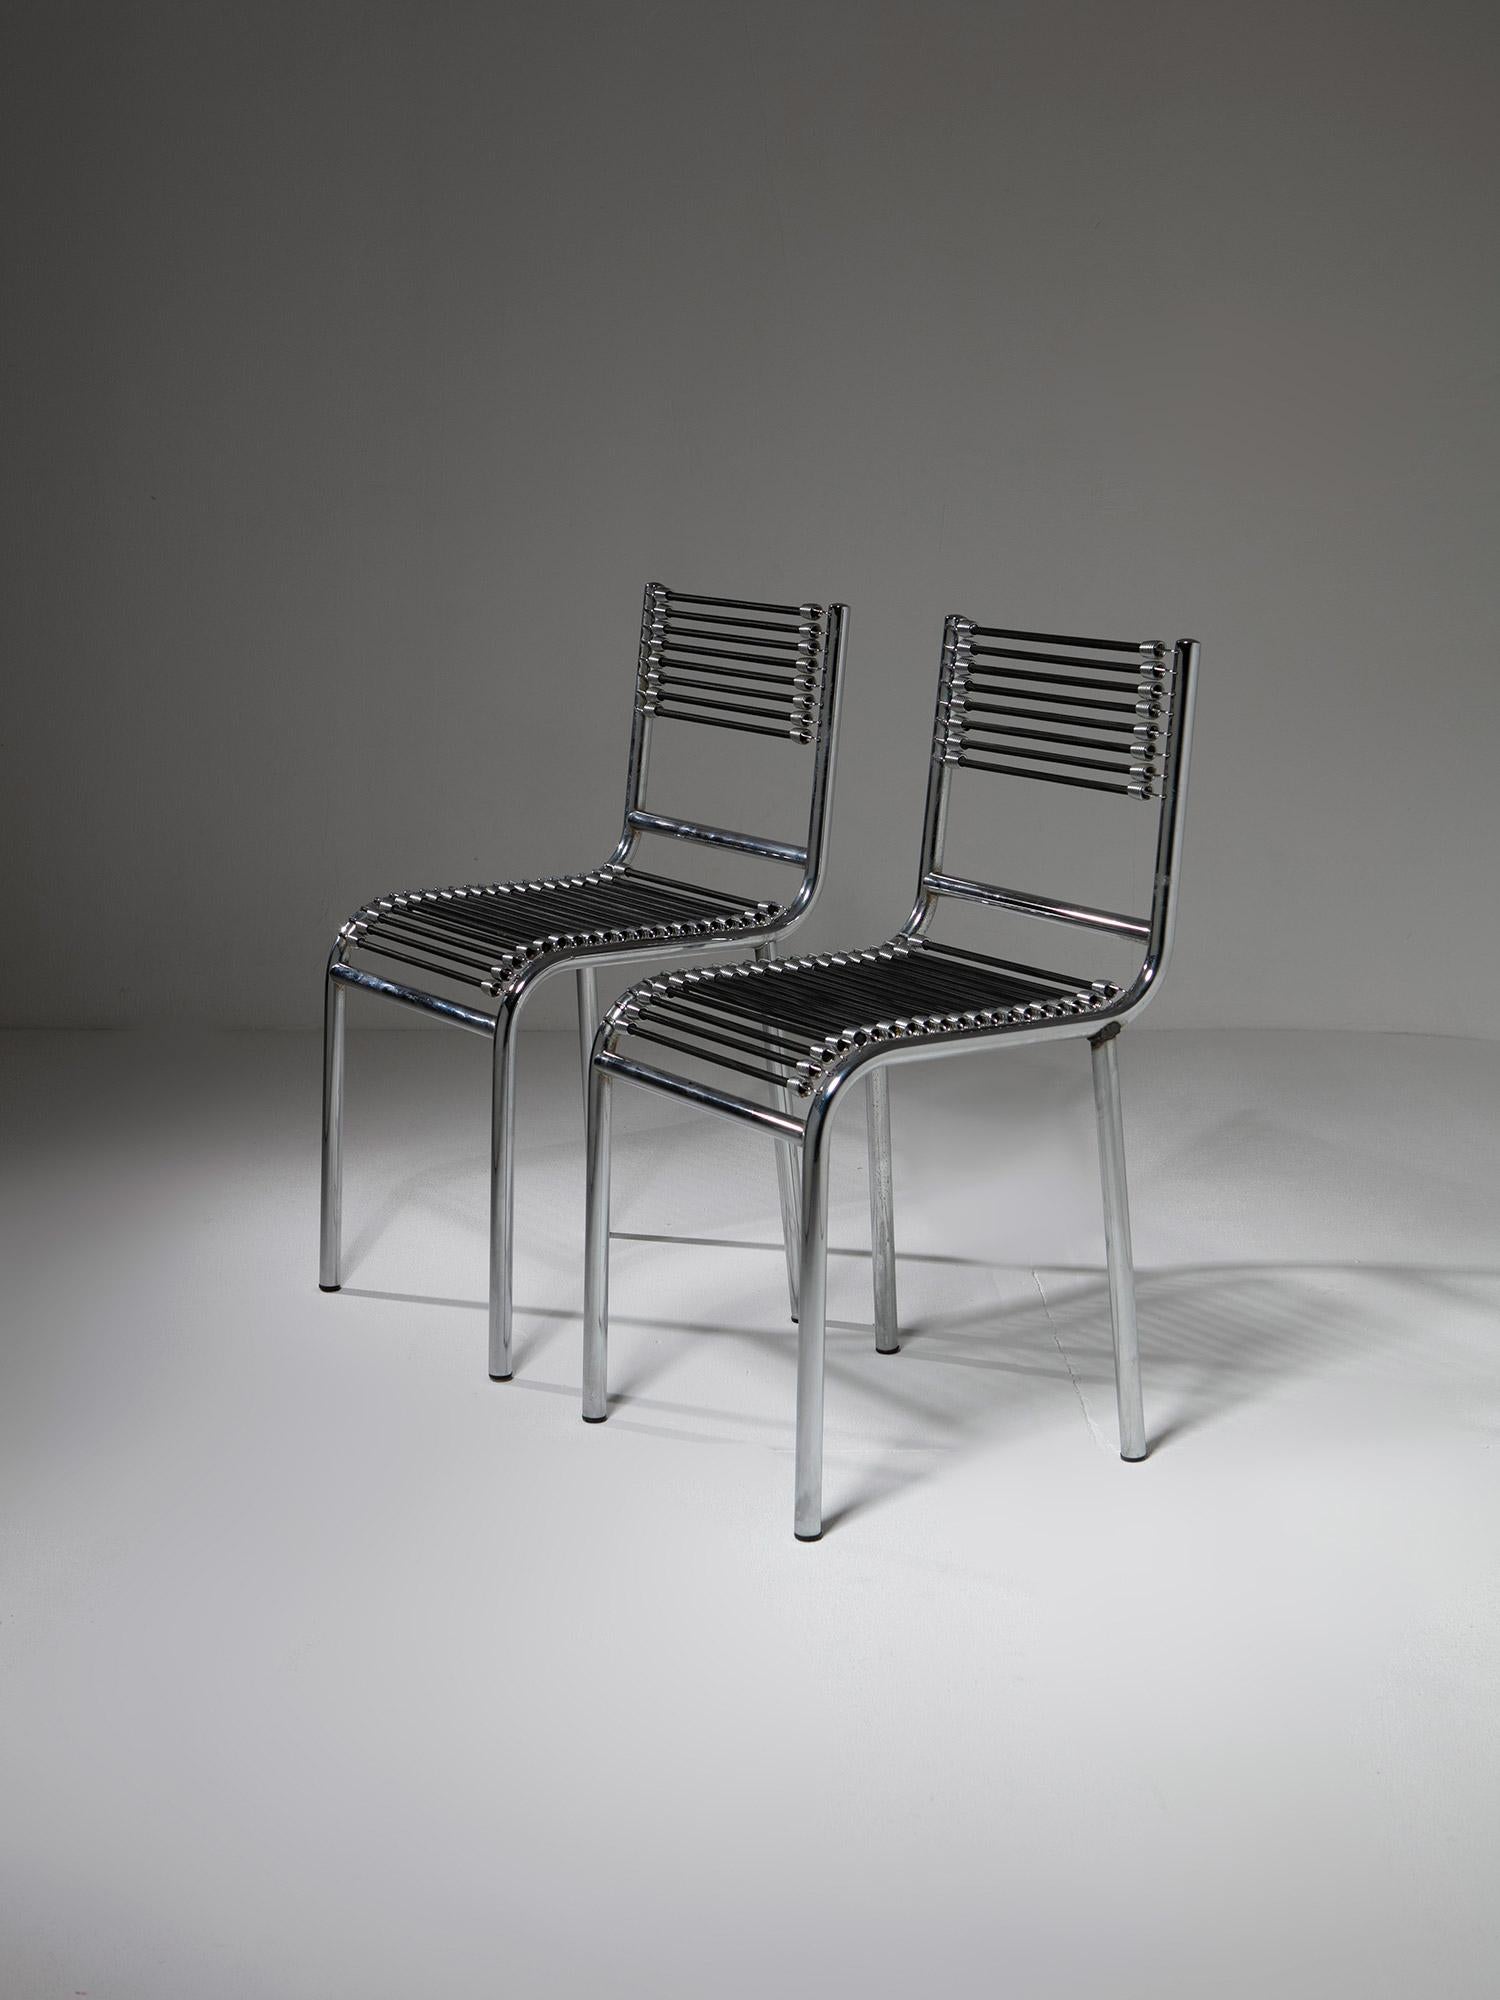 Pair of R.H. N°1 chairs by Renè Herbst.
1928 project issued in 1980 by Pallucco featuring tubular steel chrome plated frame.
Back and seat rest are composed by black tension straps with chromed clamps clamping the structure.